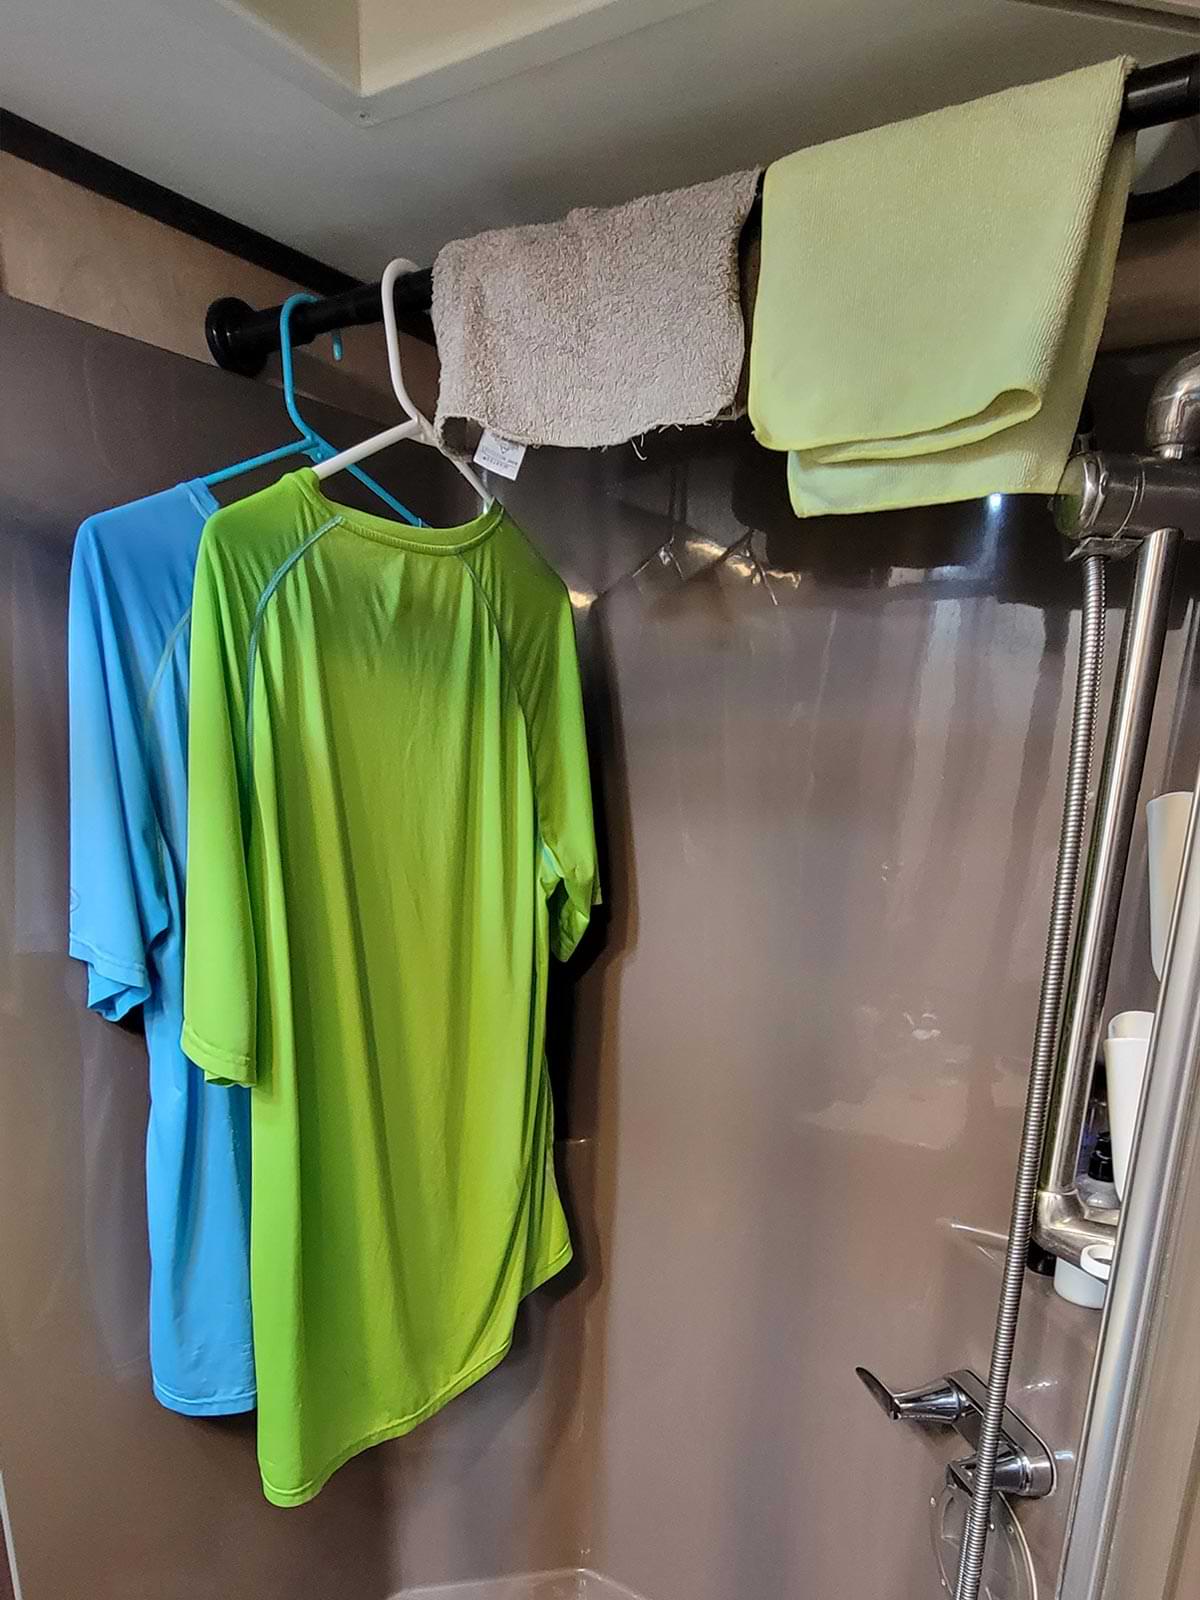 clothes hang from a shower curtain rod in an RV shower